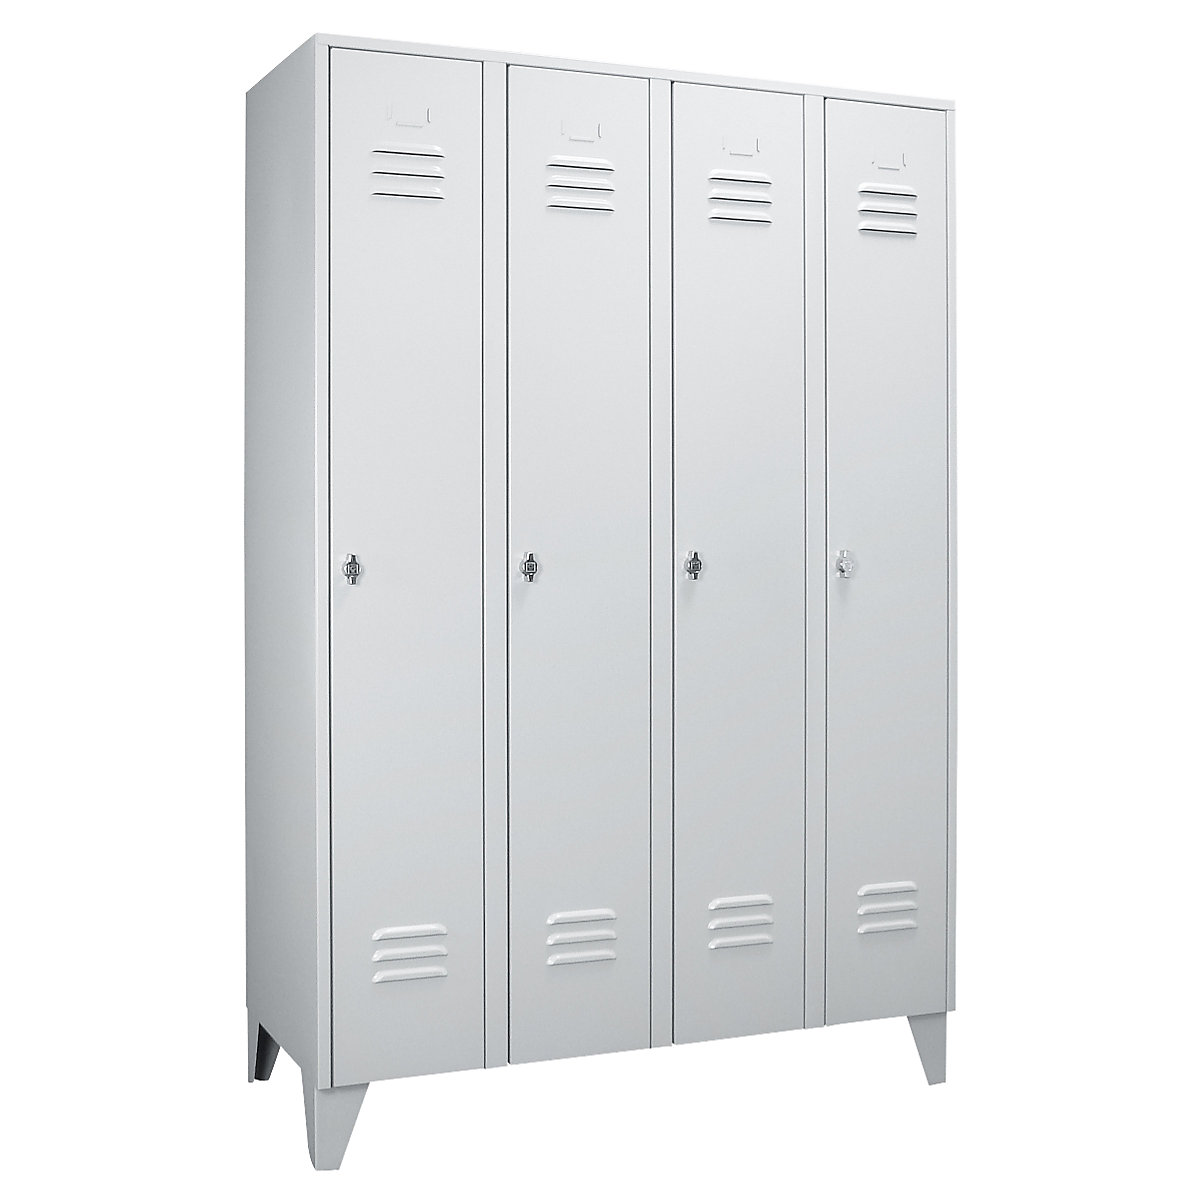 Steel locker with stud feet – Wolf, full height compartments, solid doors, compartment width 300 mm, 4 compartments, light grey-69